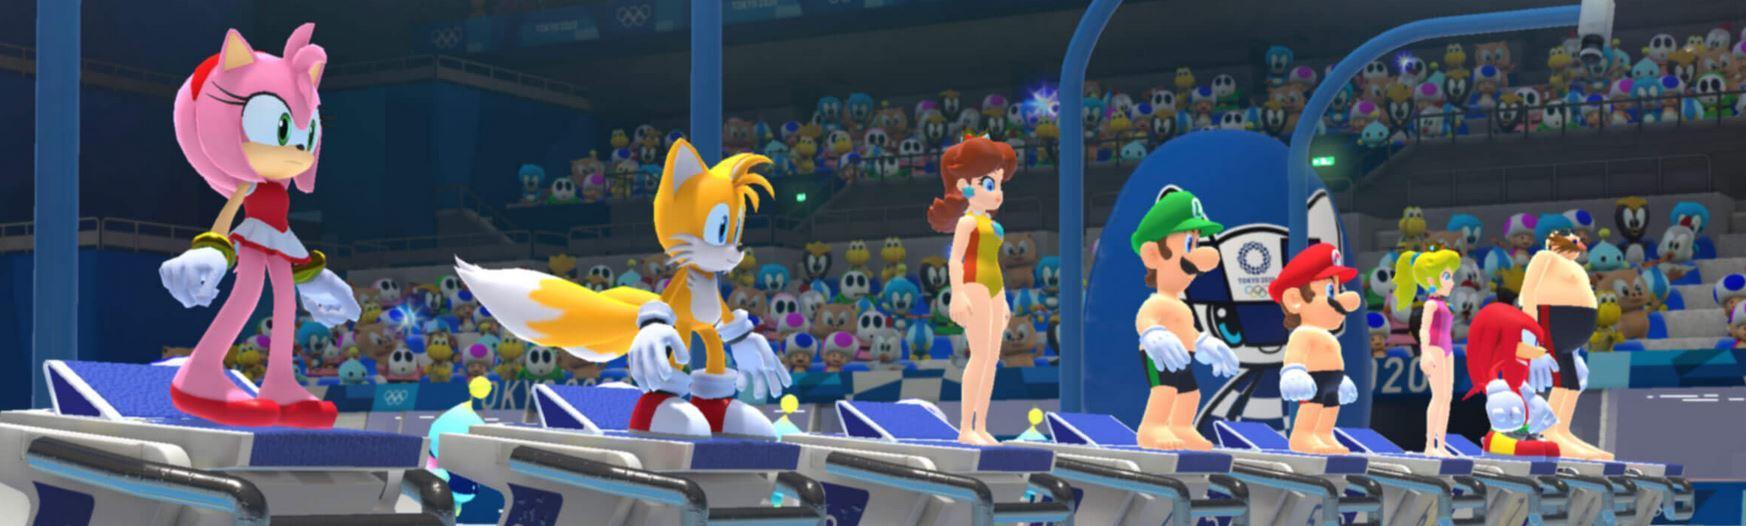 Mario and Sonic at the 2020 Tokyo Olympic Games